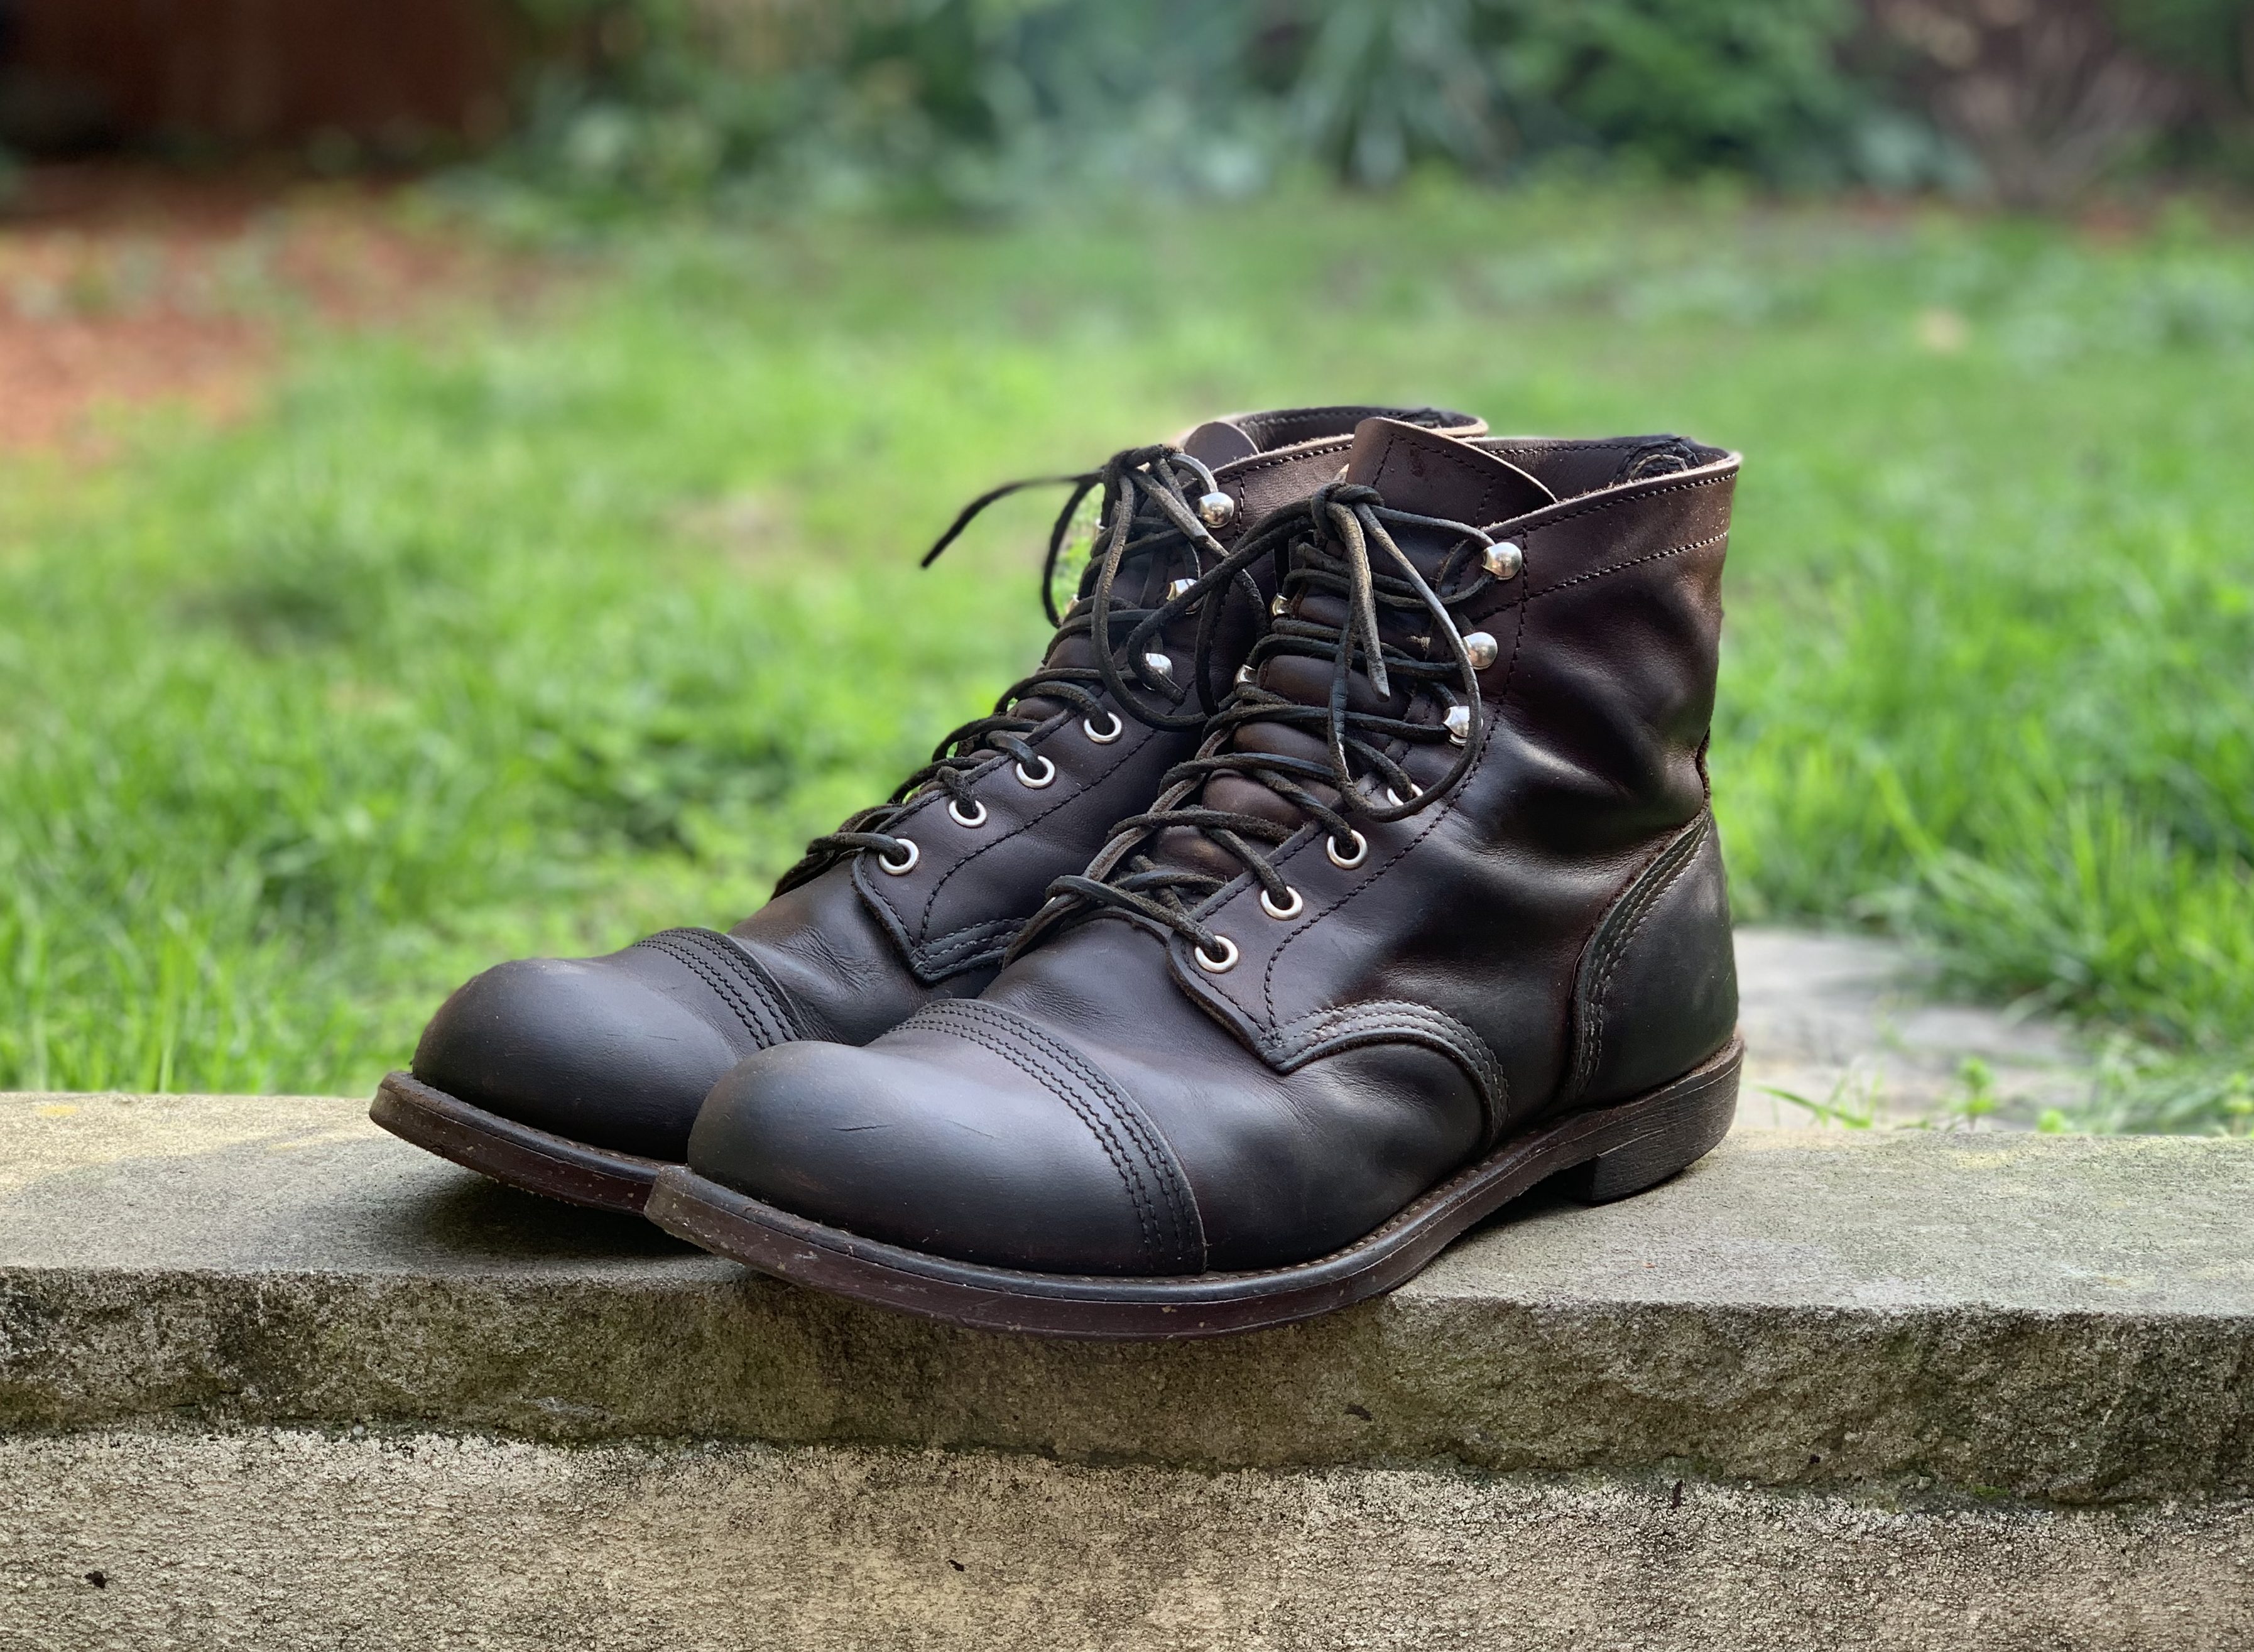 red wing iron ranger black harness